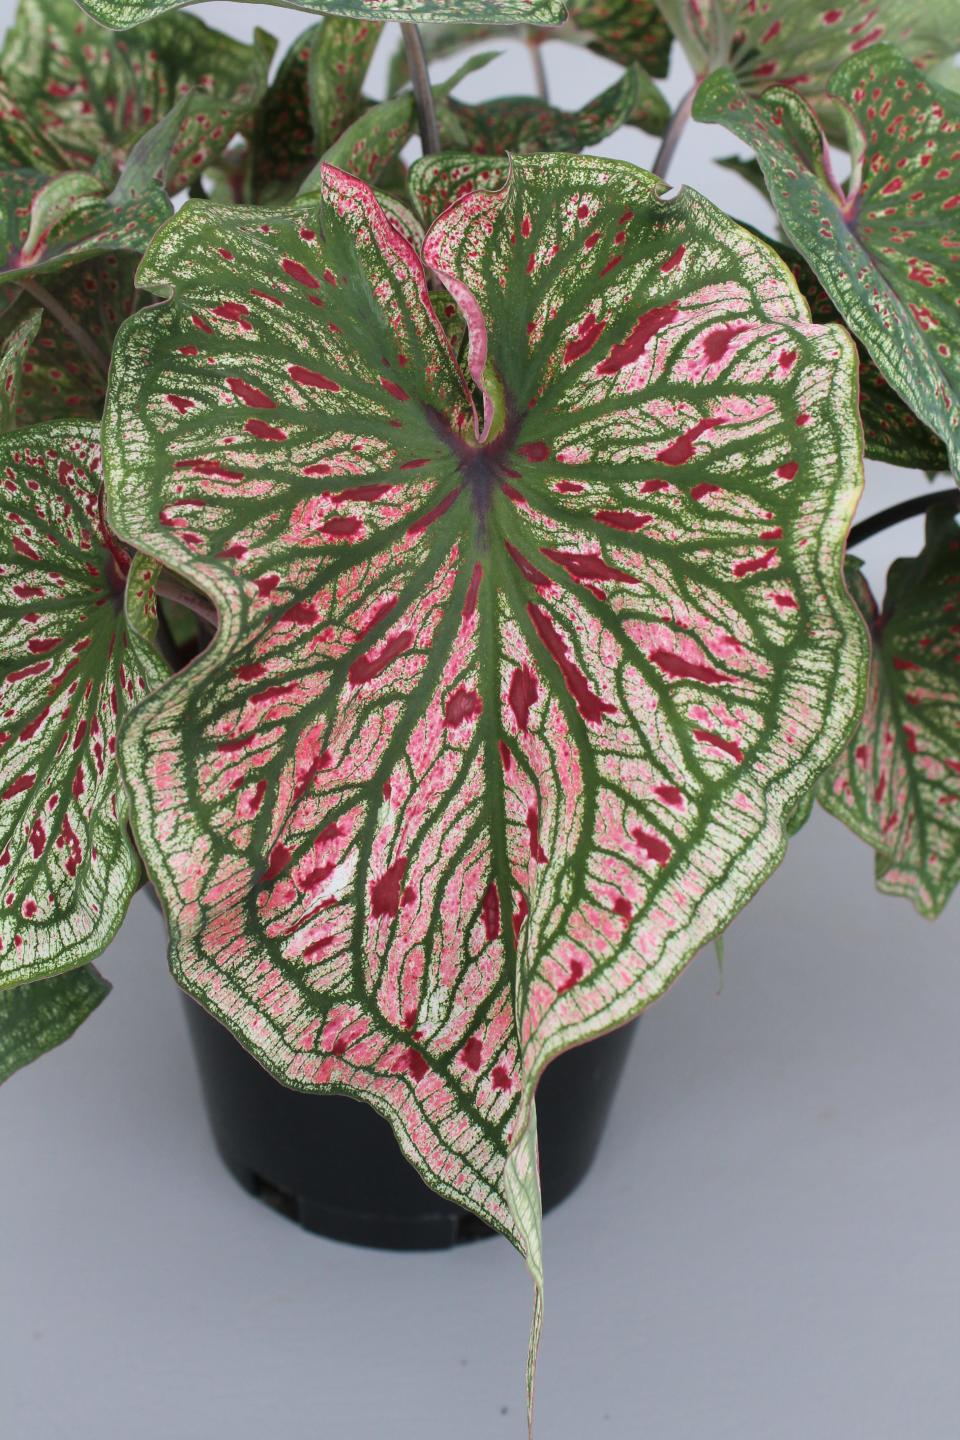 Spicy Lizard is a new caladium variety developed by the University of Florida.